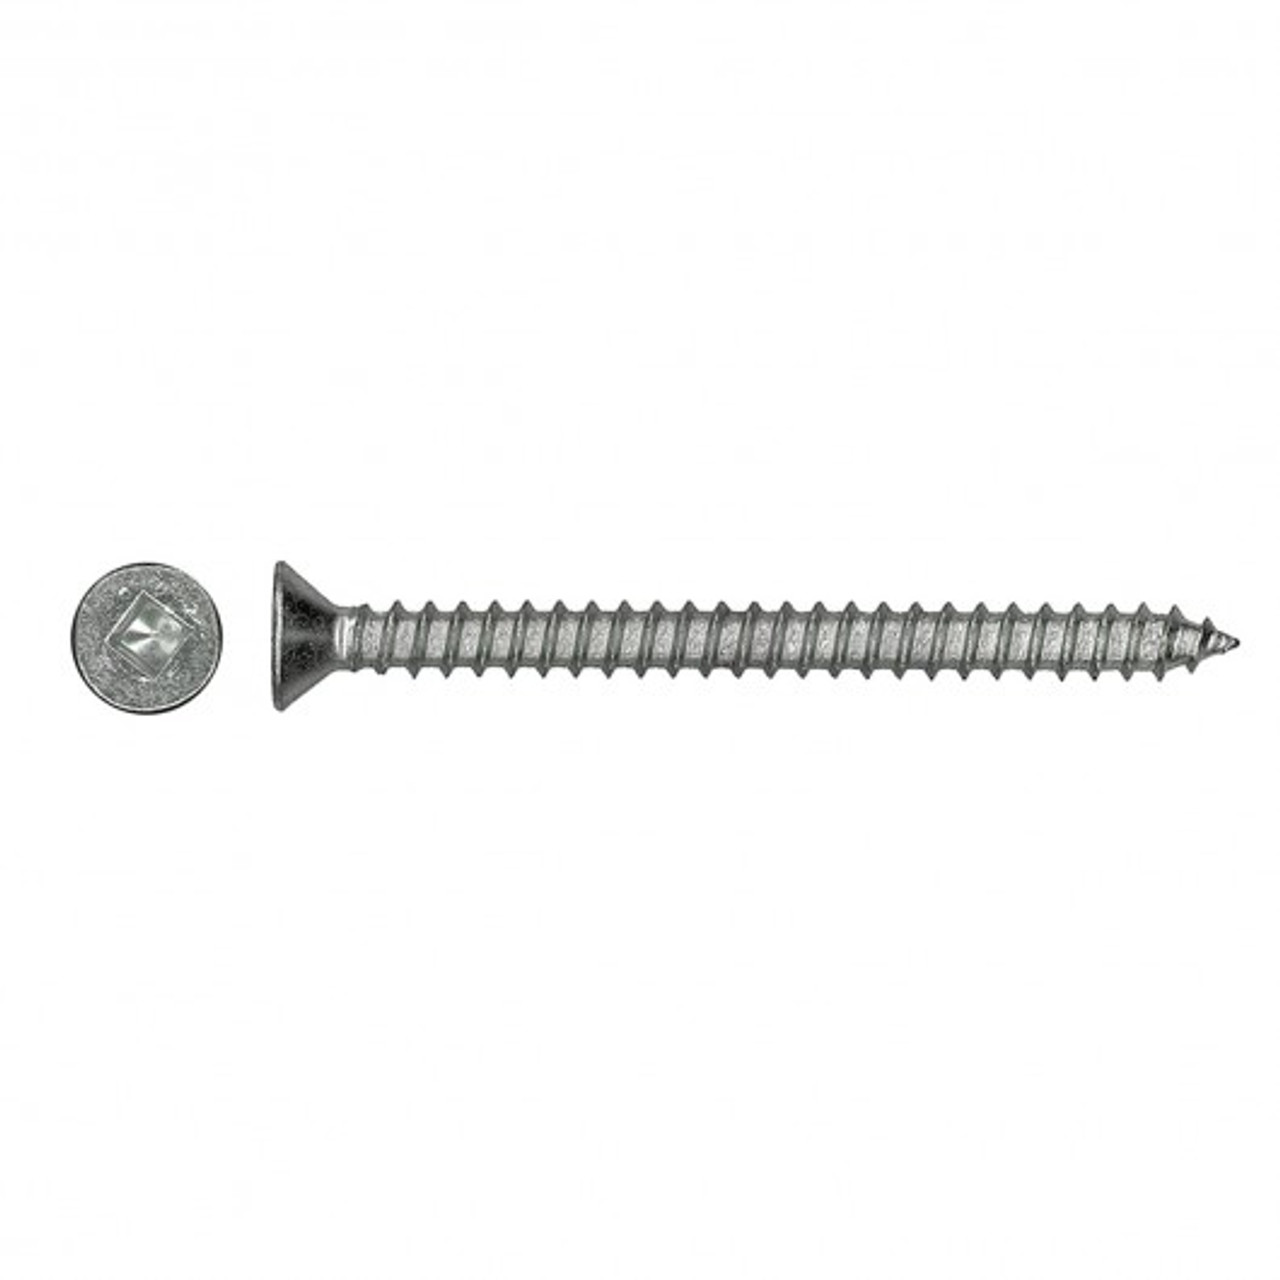 #12 x 1-1/2" Countersunk Stainless Steel Tapping Screw 100 Pc.   5162-254